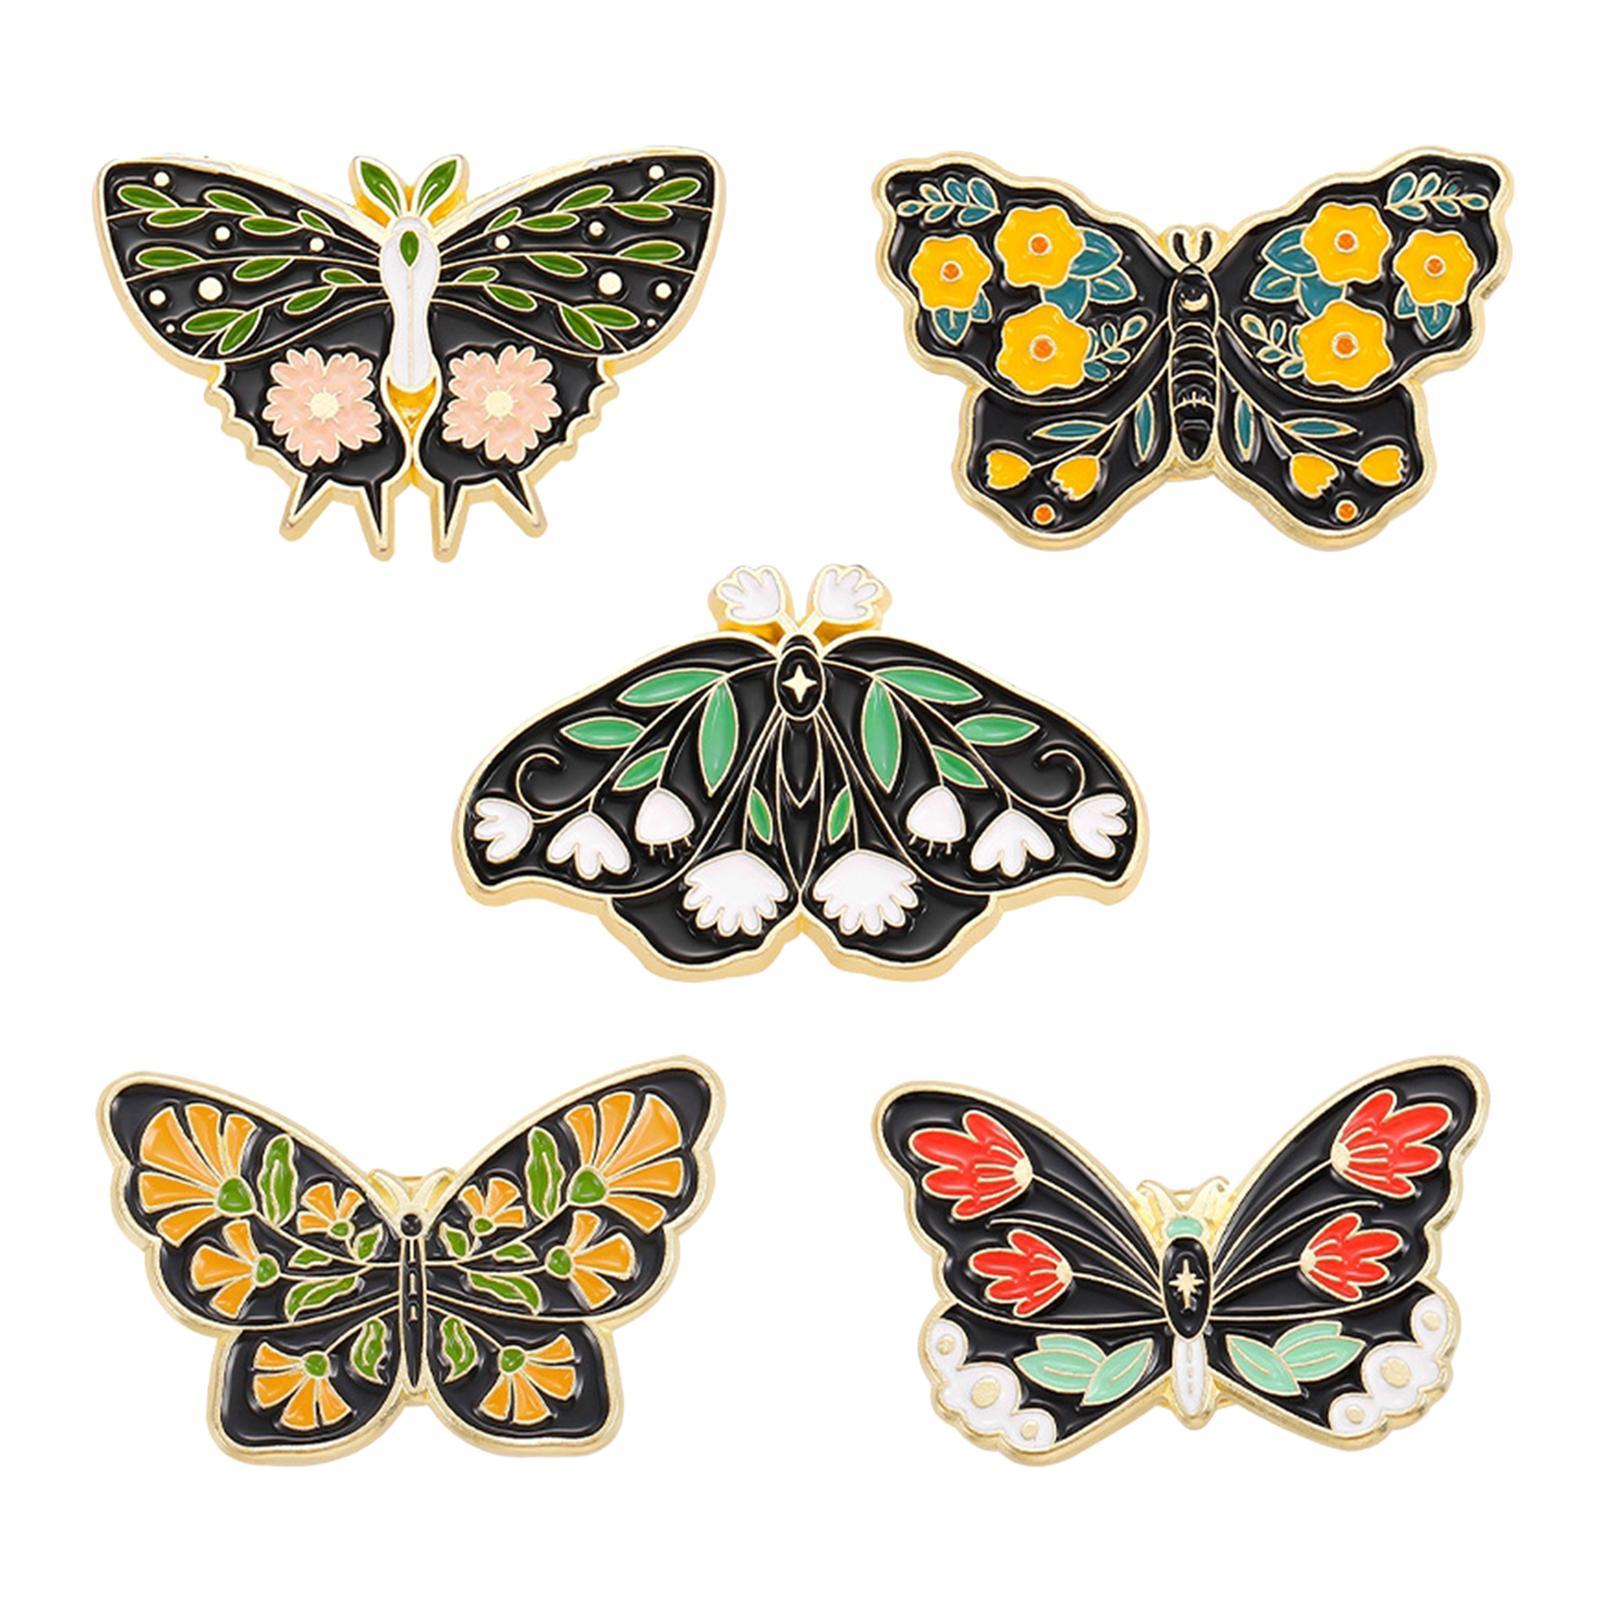 5x Fashion Butterfly Brooch Pin Lapel Pins Decor for Scarf Holiday Wedding